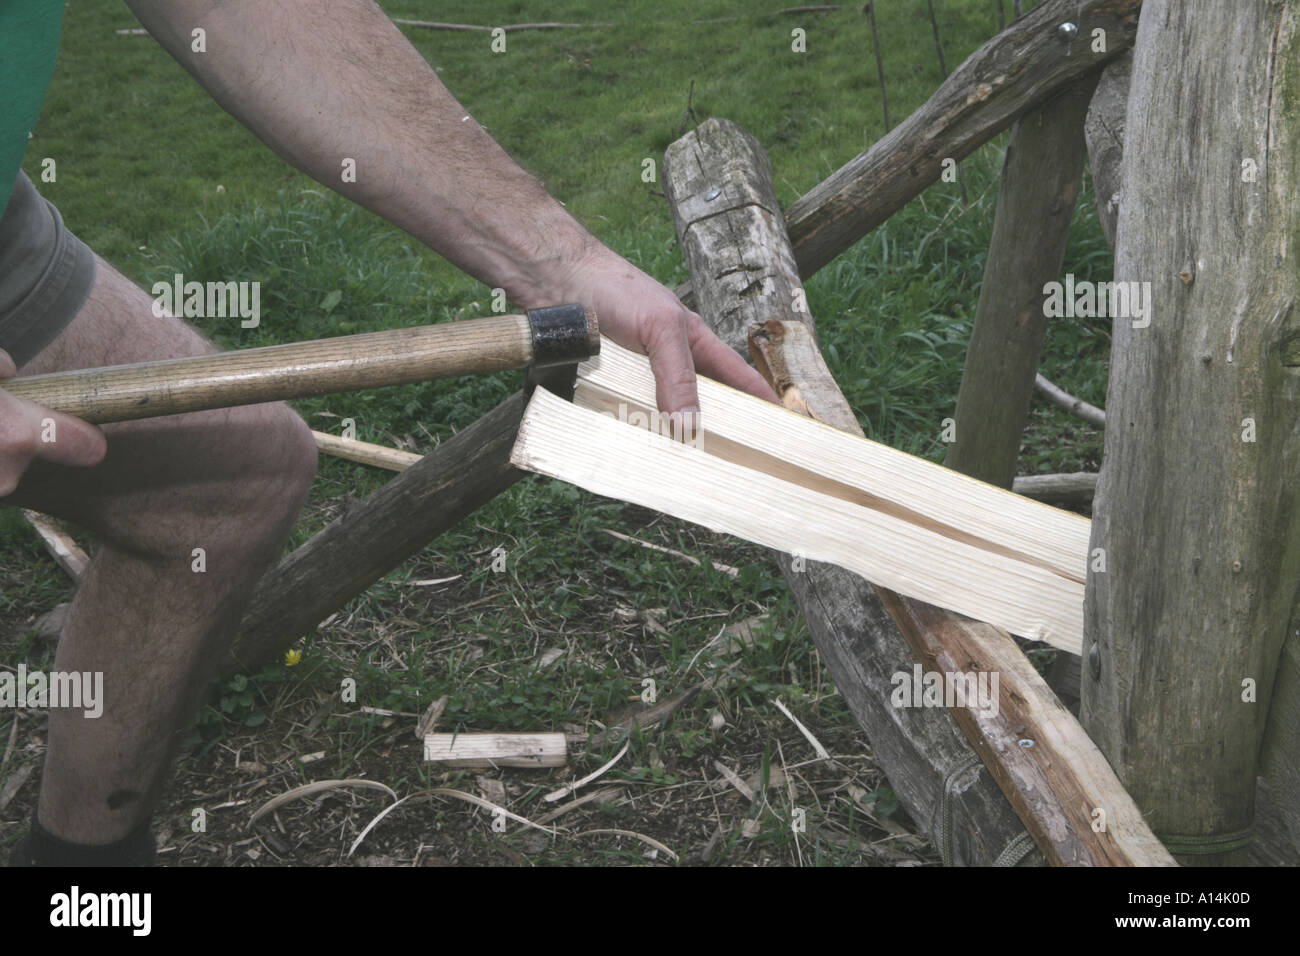 Greenwood Chair Making using a cleaving axe Stock Photo